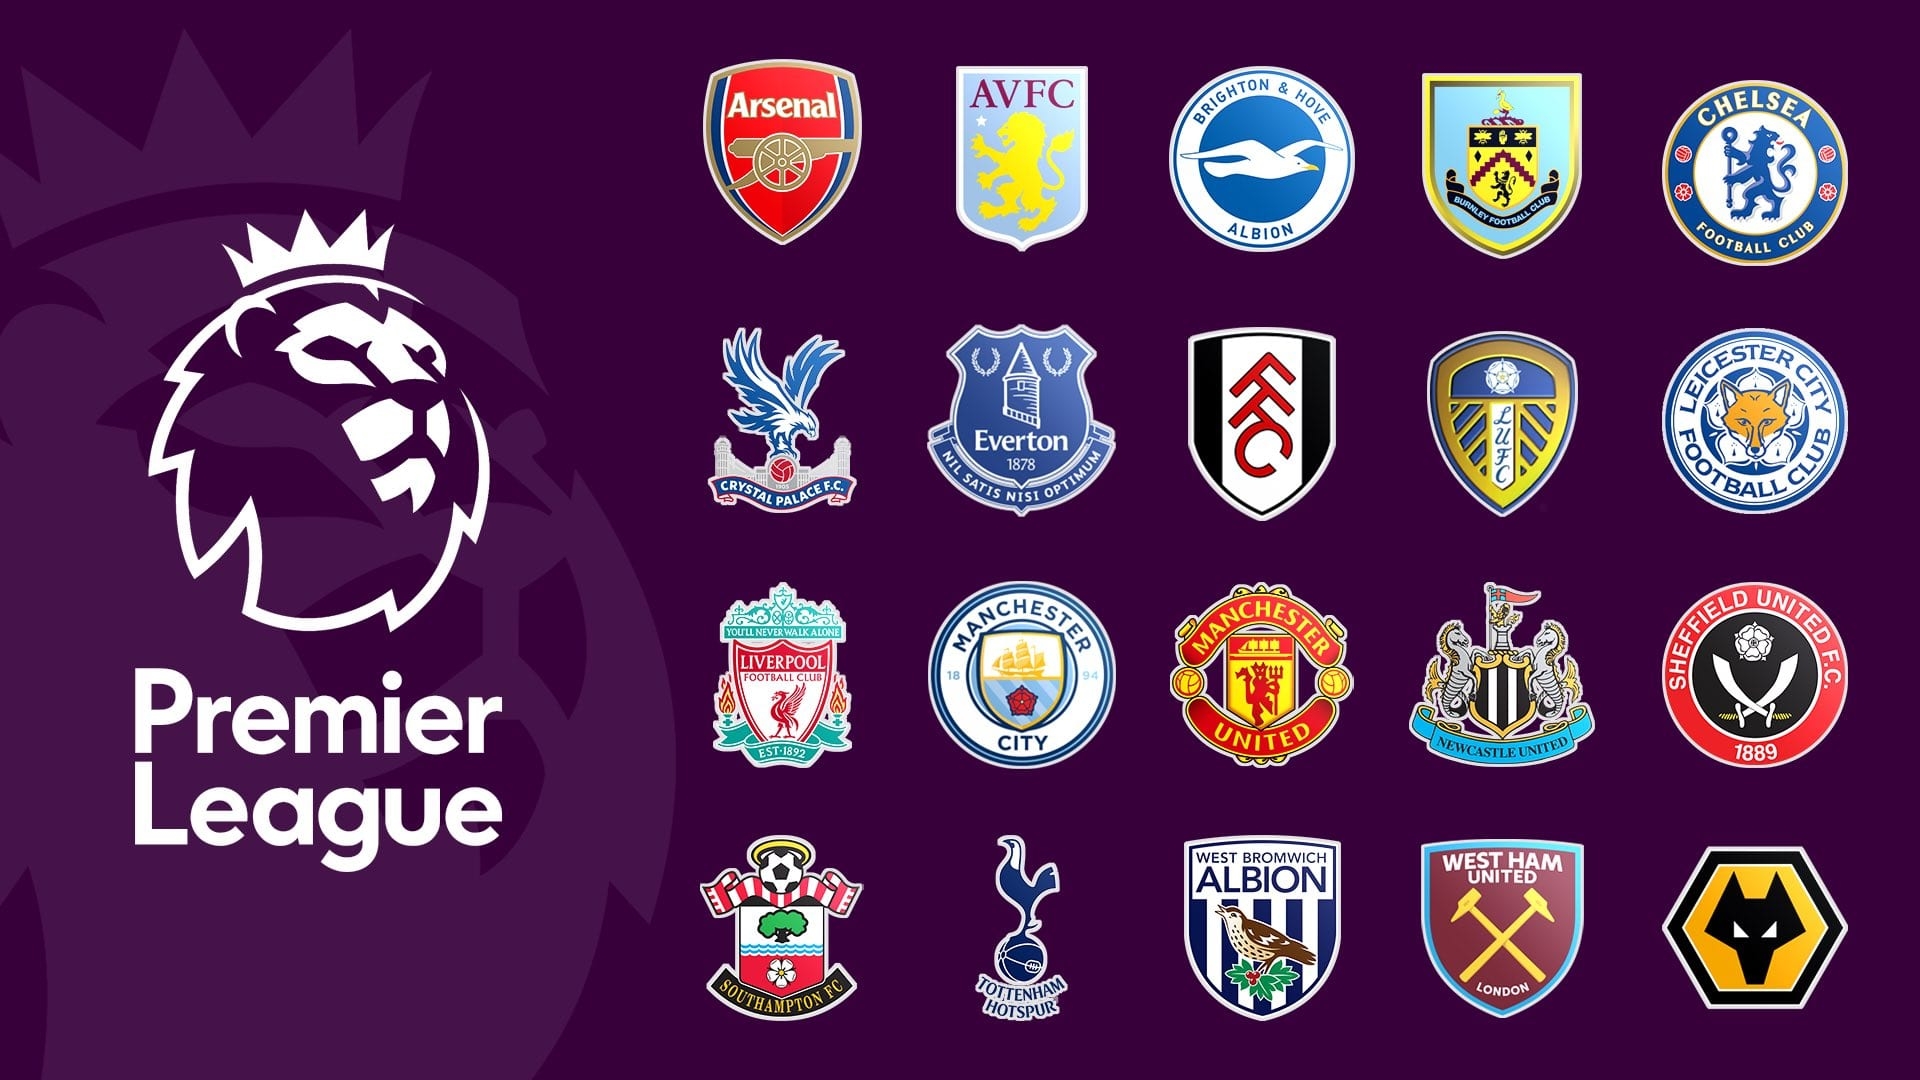 Premier League Week 30 fixtures: Table, Standings and Latest News Today